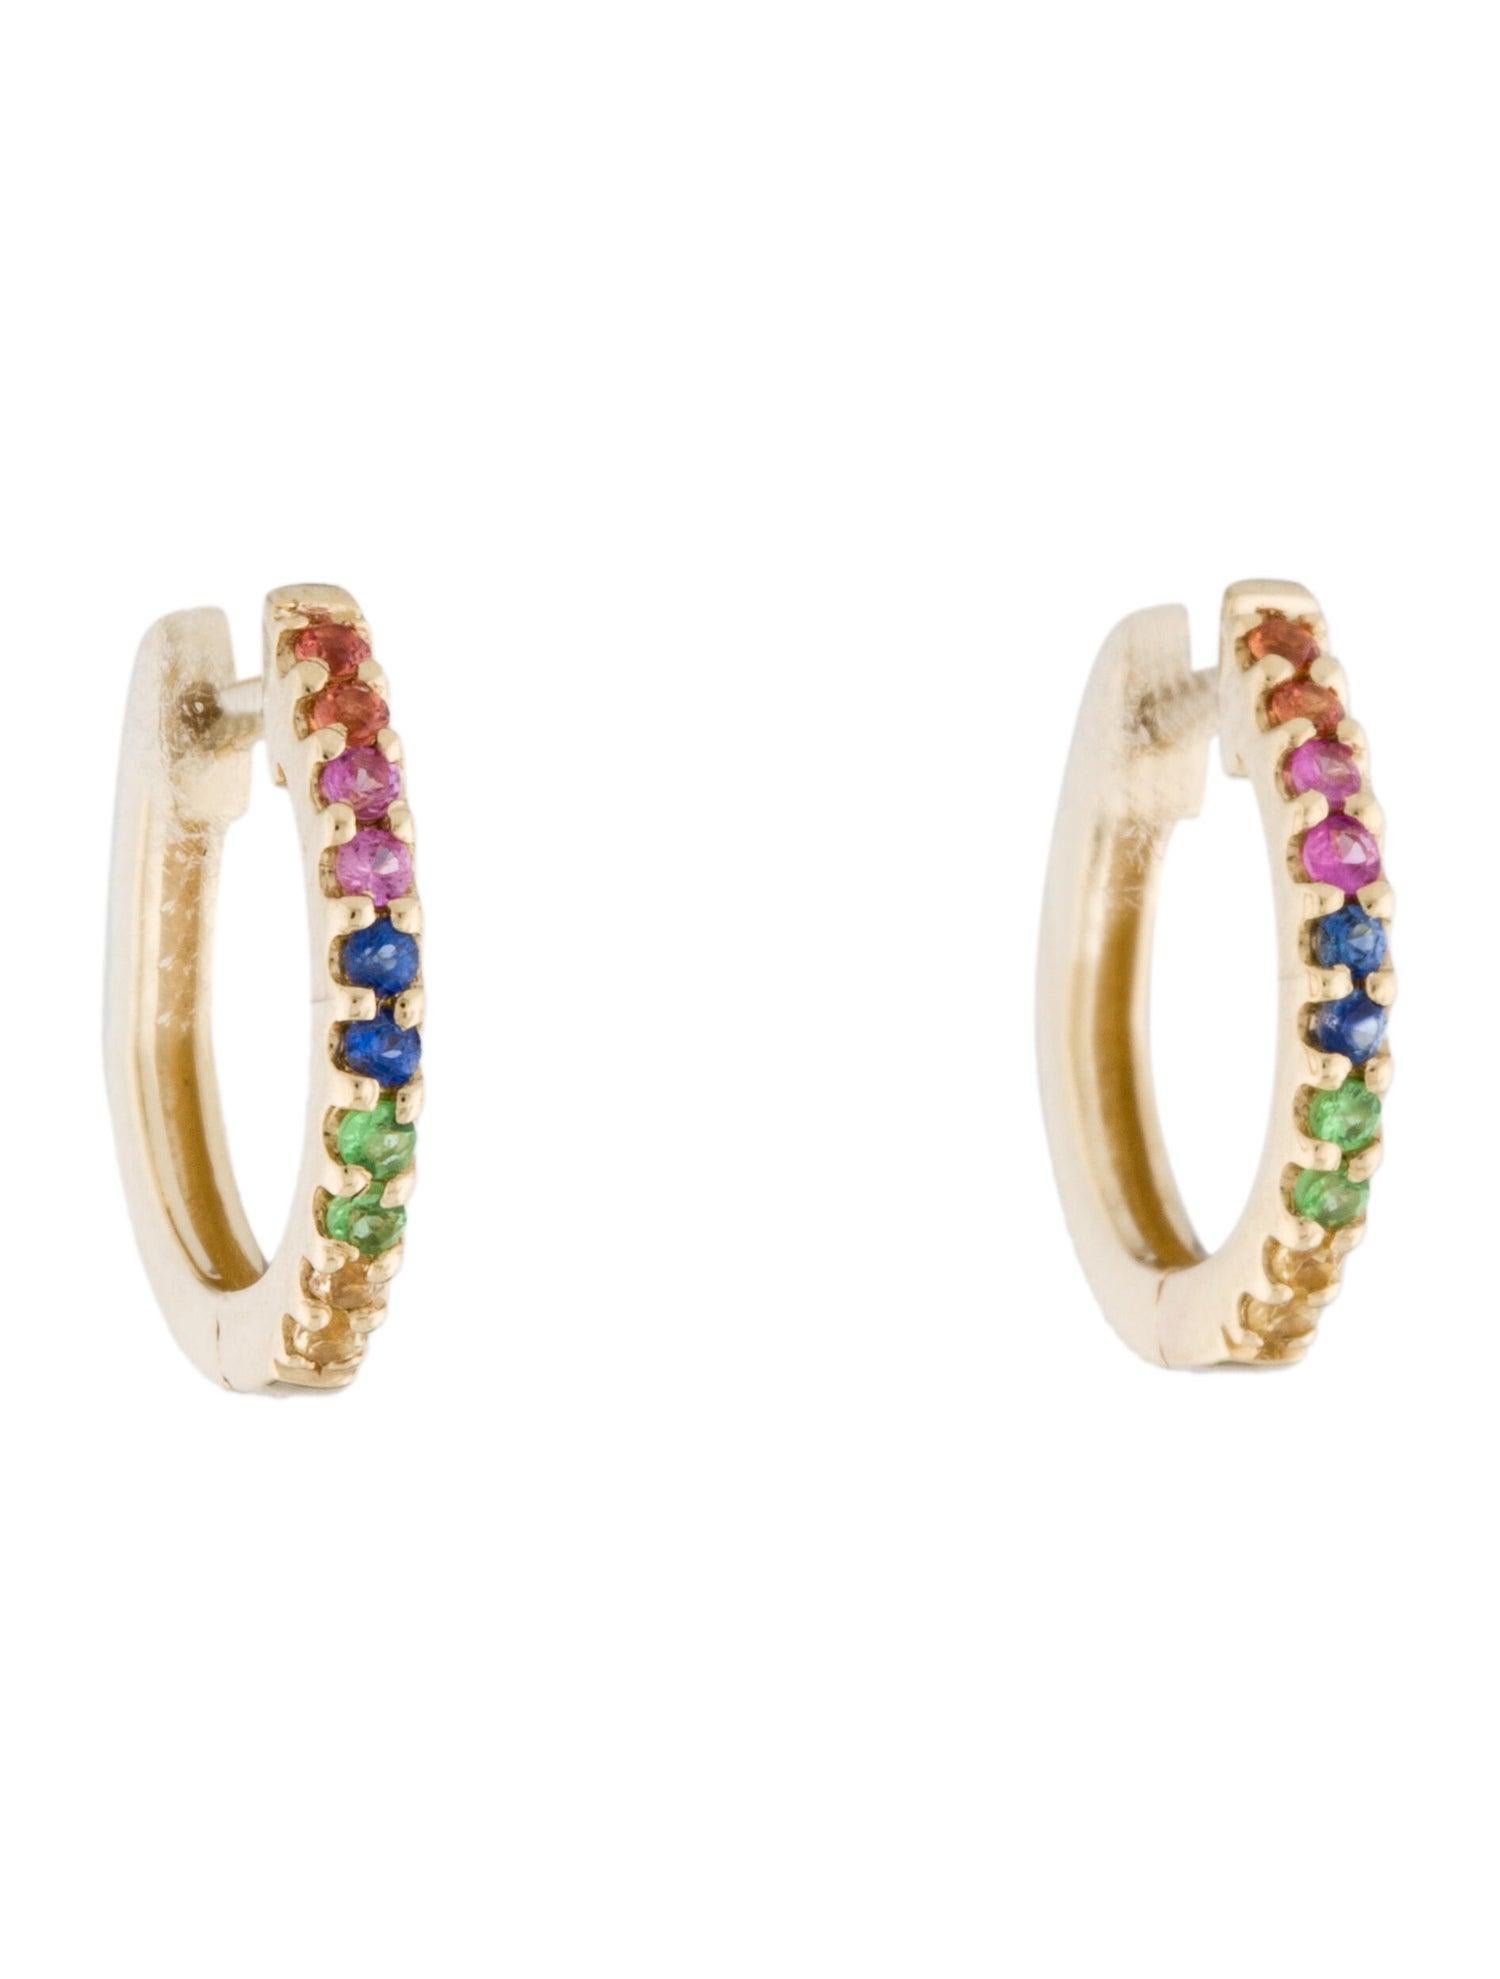 Adorn yourself or gift to a friend these colorful and fun Rainbow Sapphire small huggy hoop earrings featuring approximately 0.18ct of colored sapphires. Lever back closure. Super cute for a second piercing.
-14K Gold
-0.18 ct. Multi